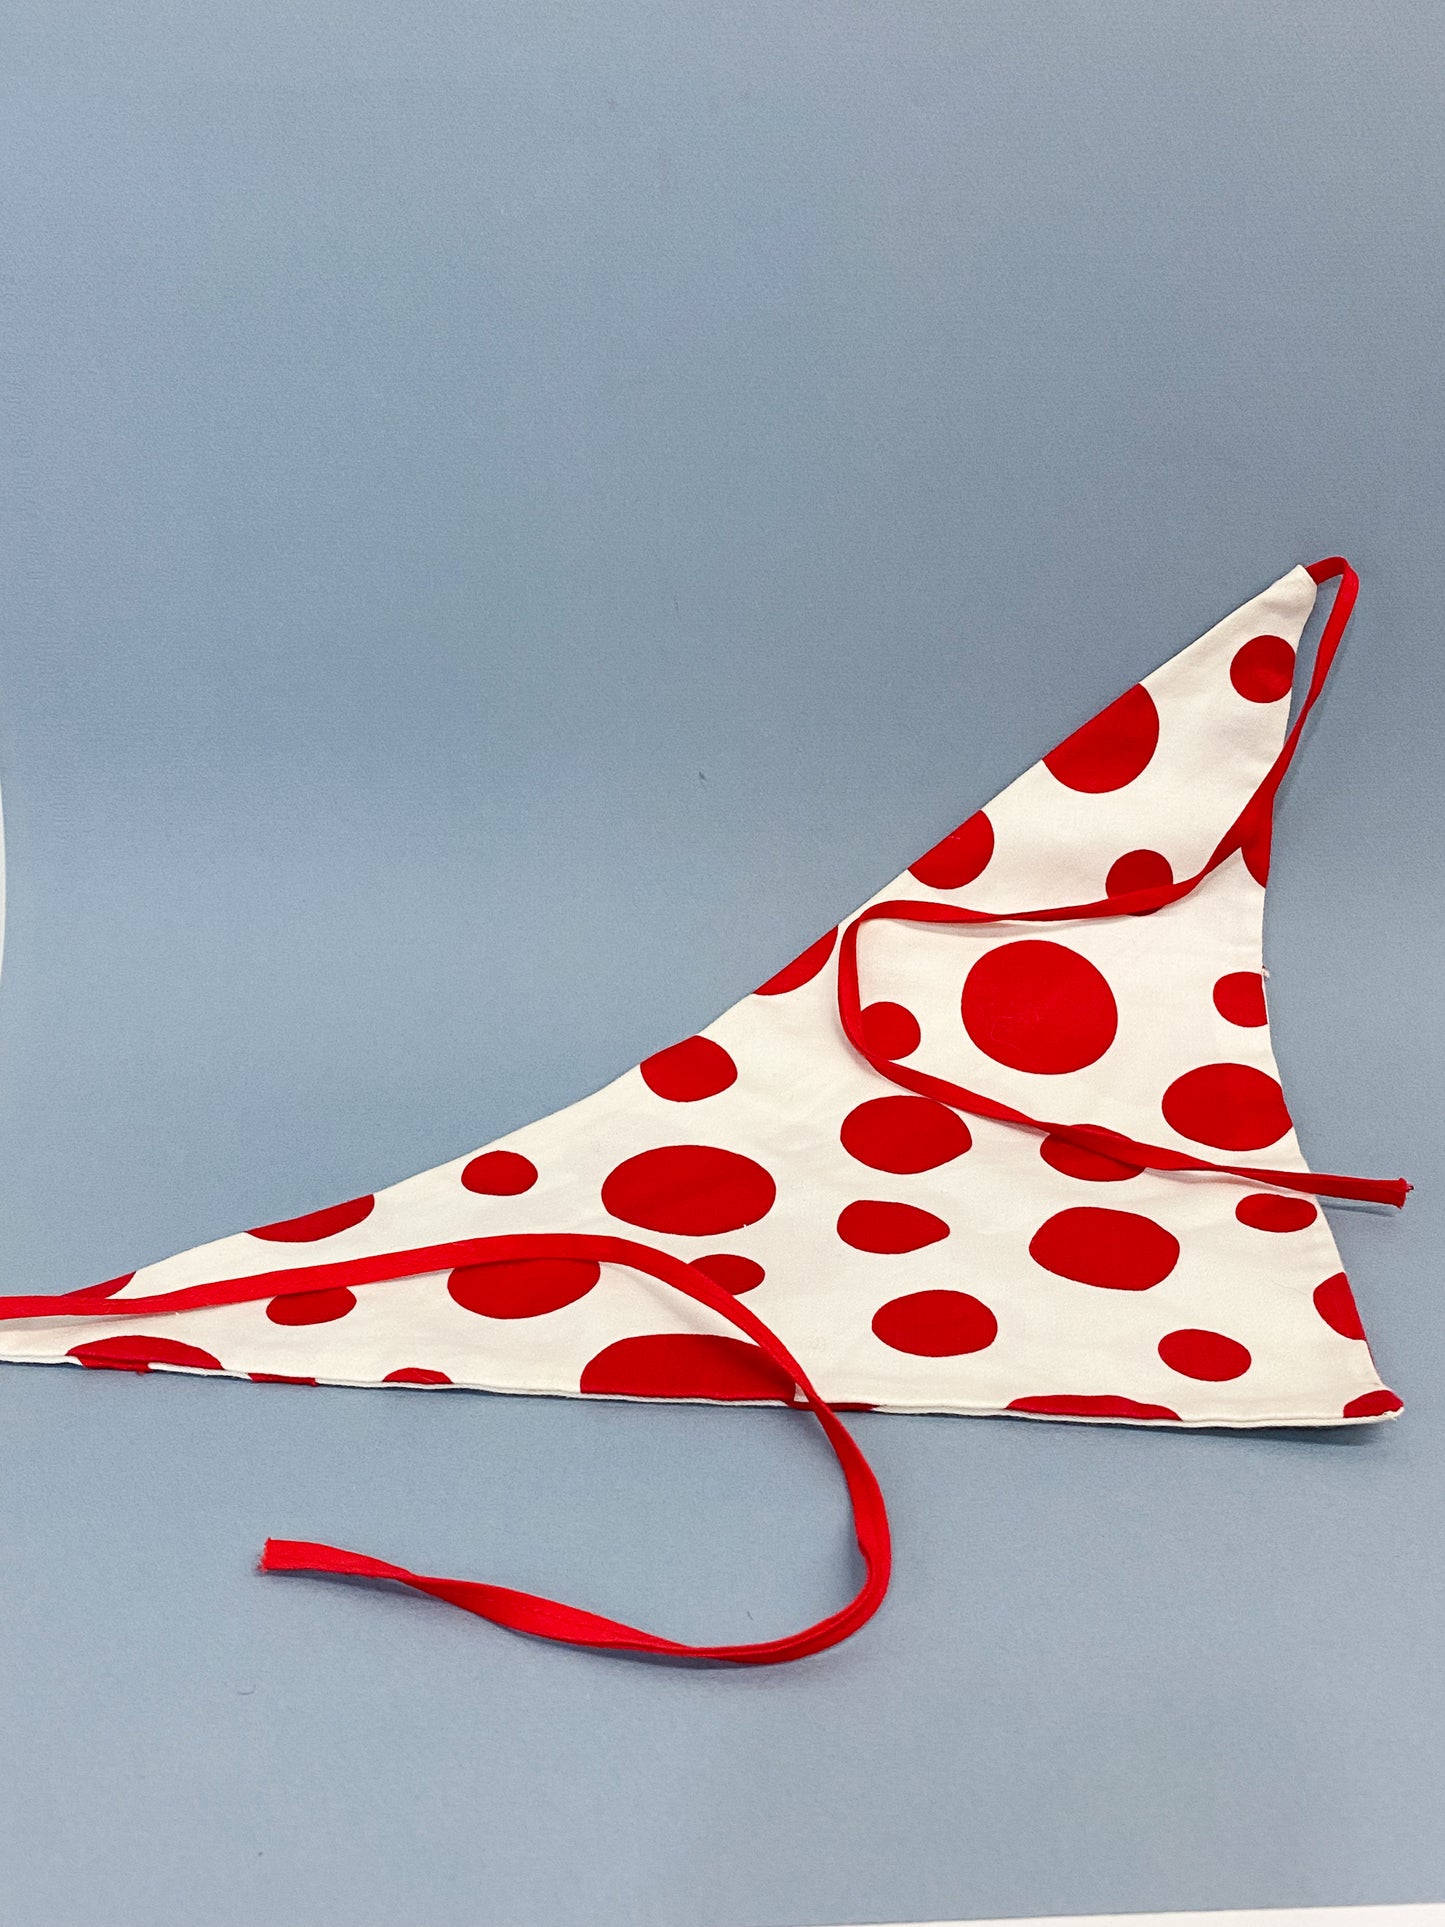 60's 70's "Marvelous Mrs. Maisel" Red & White Polka Dot Triangle Head Scarf Kerchief